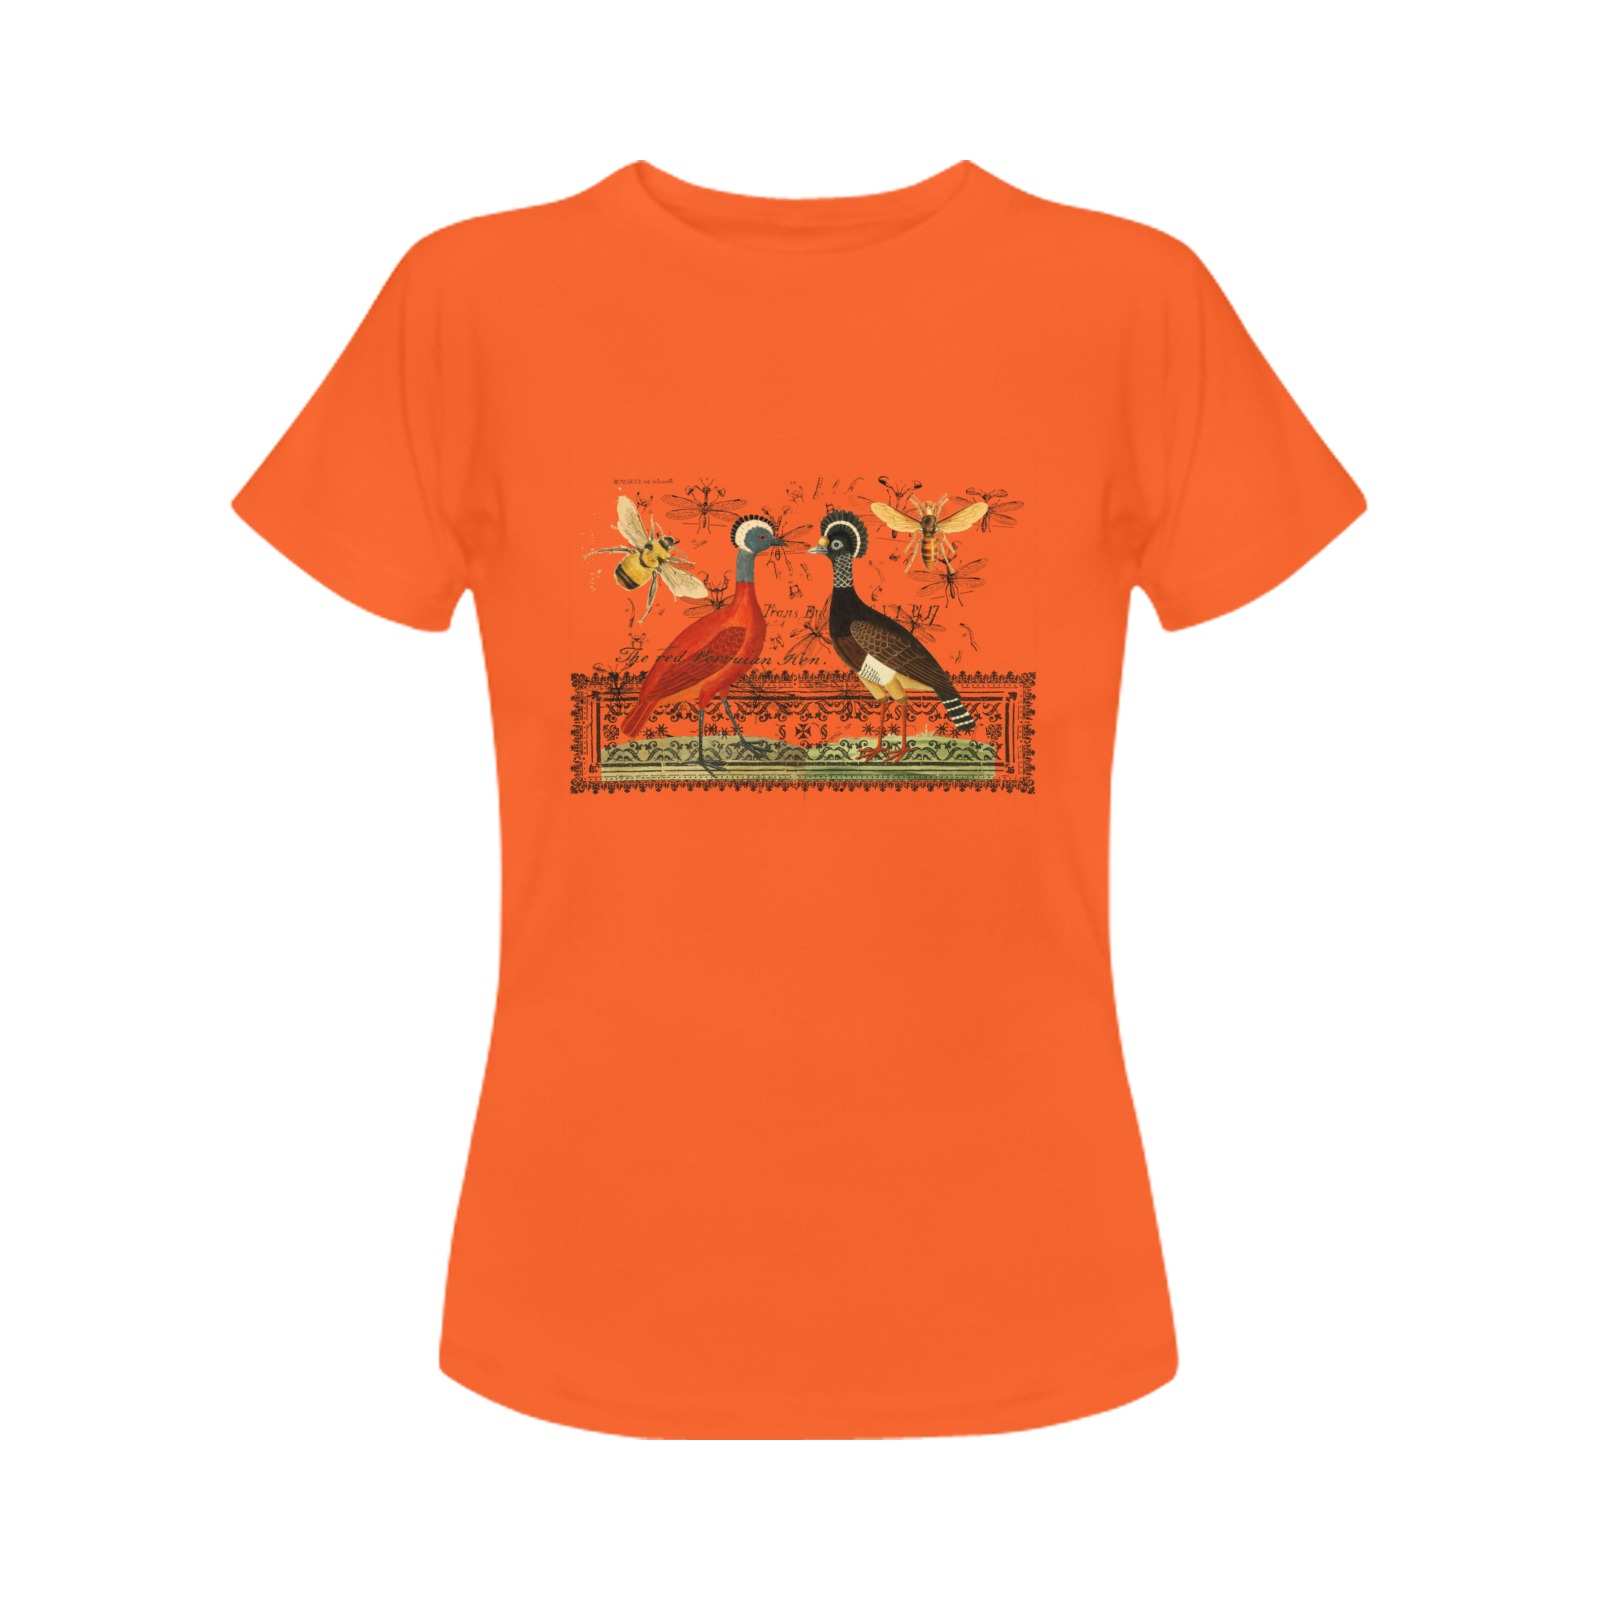 Two Hens, Two Bees and an Illustrated Rug Orange Women's T-Shirt in USA Size (Front Printing Only)